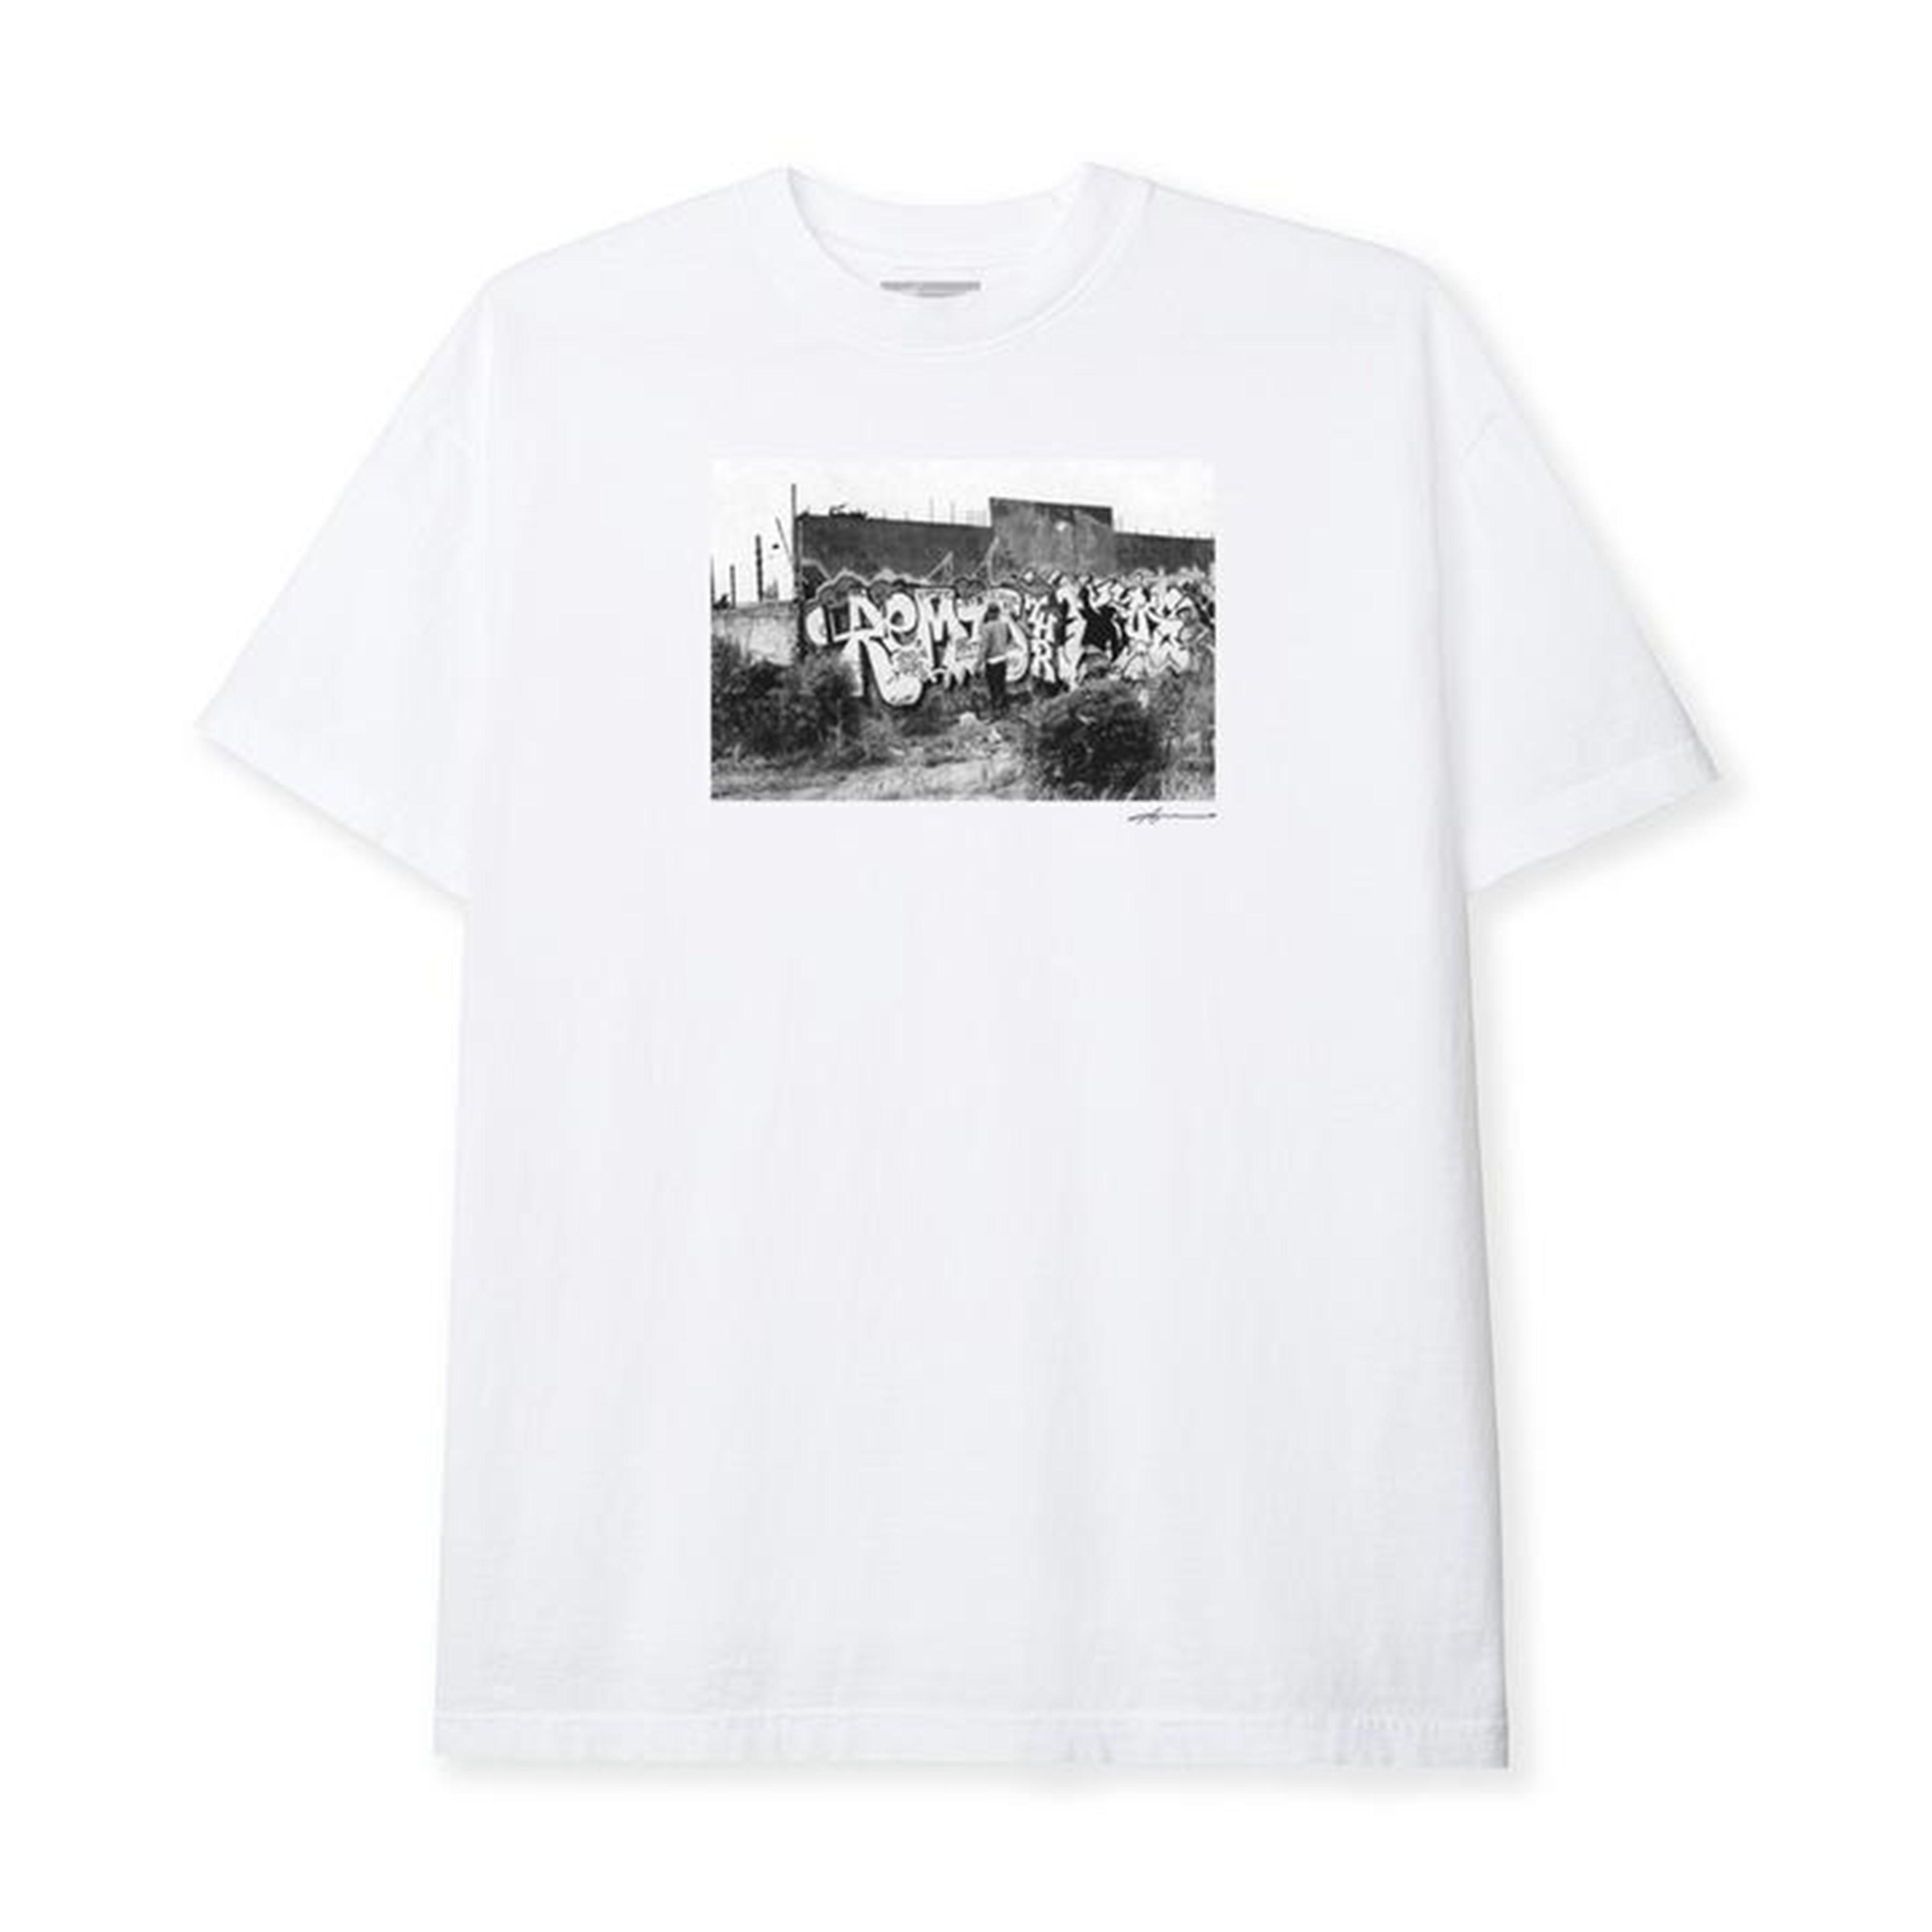 Ari Marcopoulos Hunter's Point T-Shirt (White) by ARI MARCOPOULOS